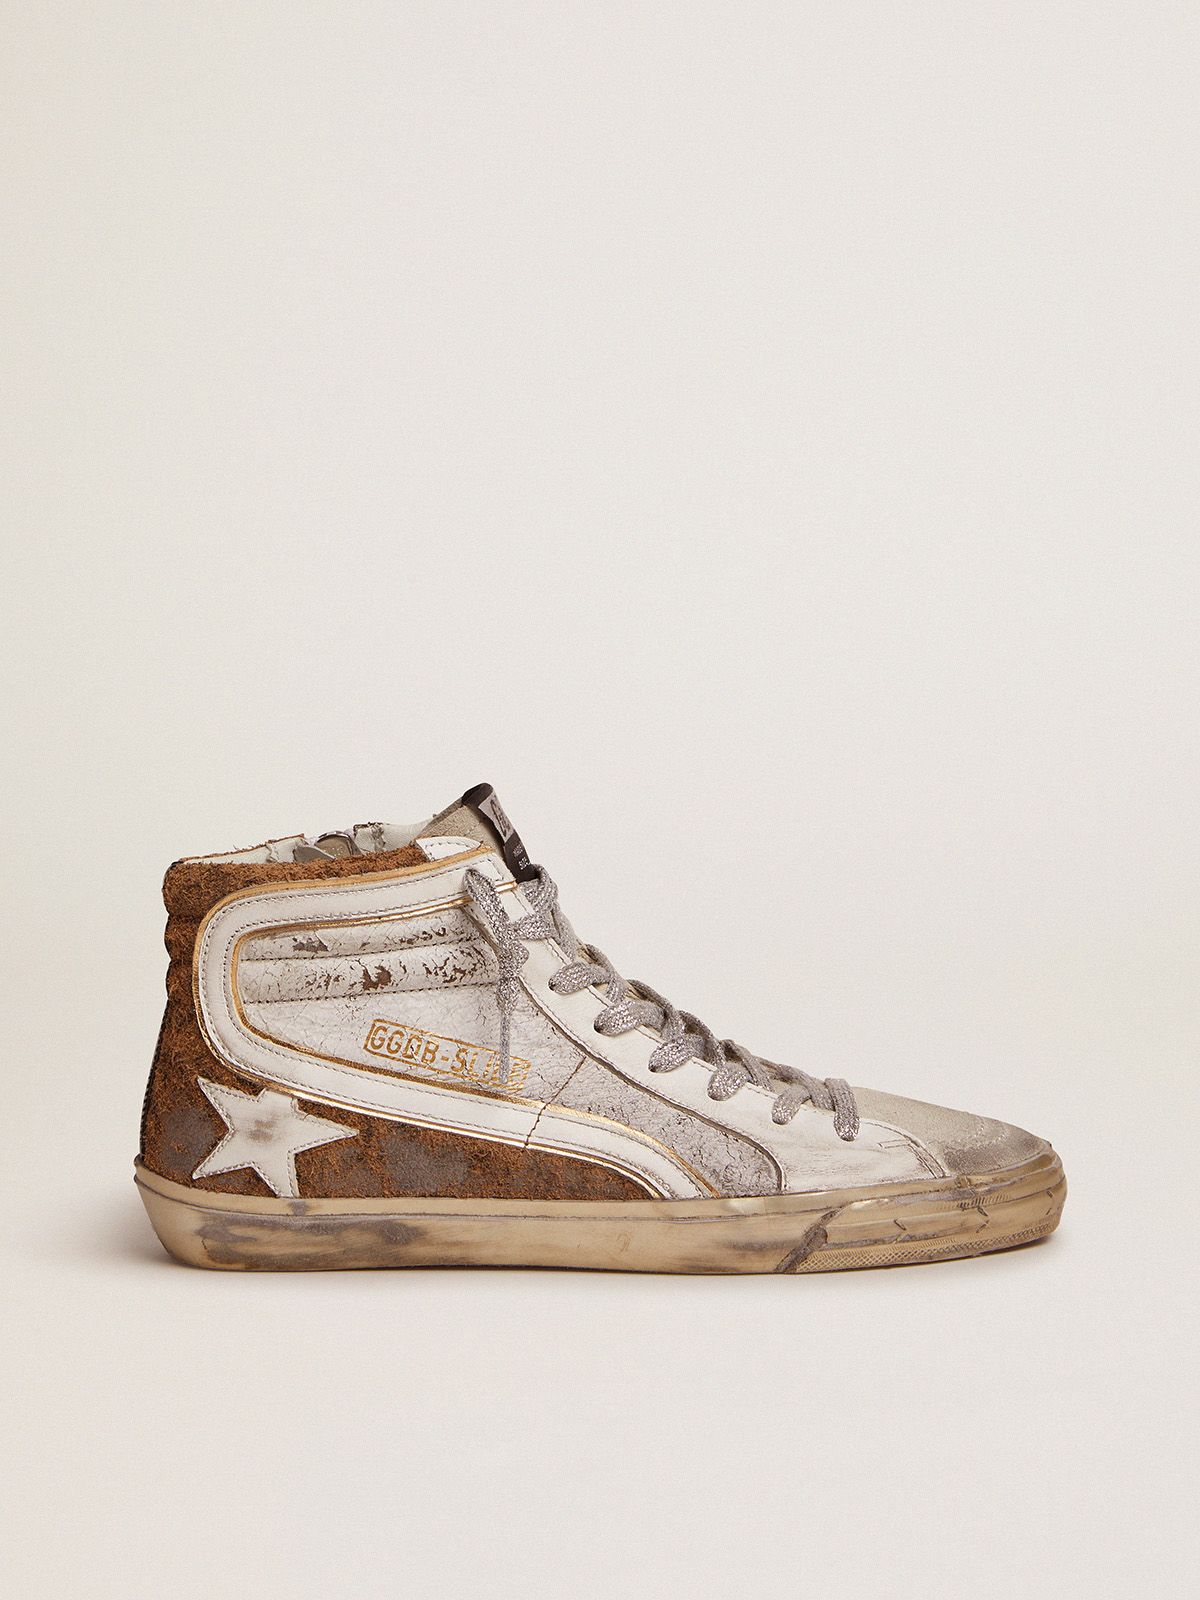 golden goose leopard-print Slide suede sneakers leather and crackle in